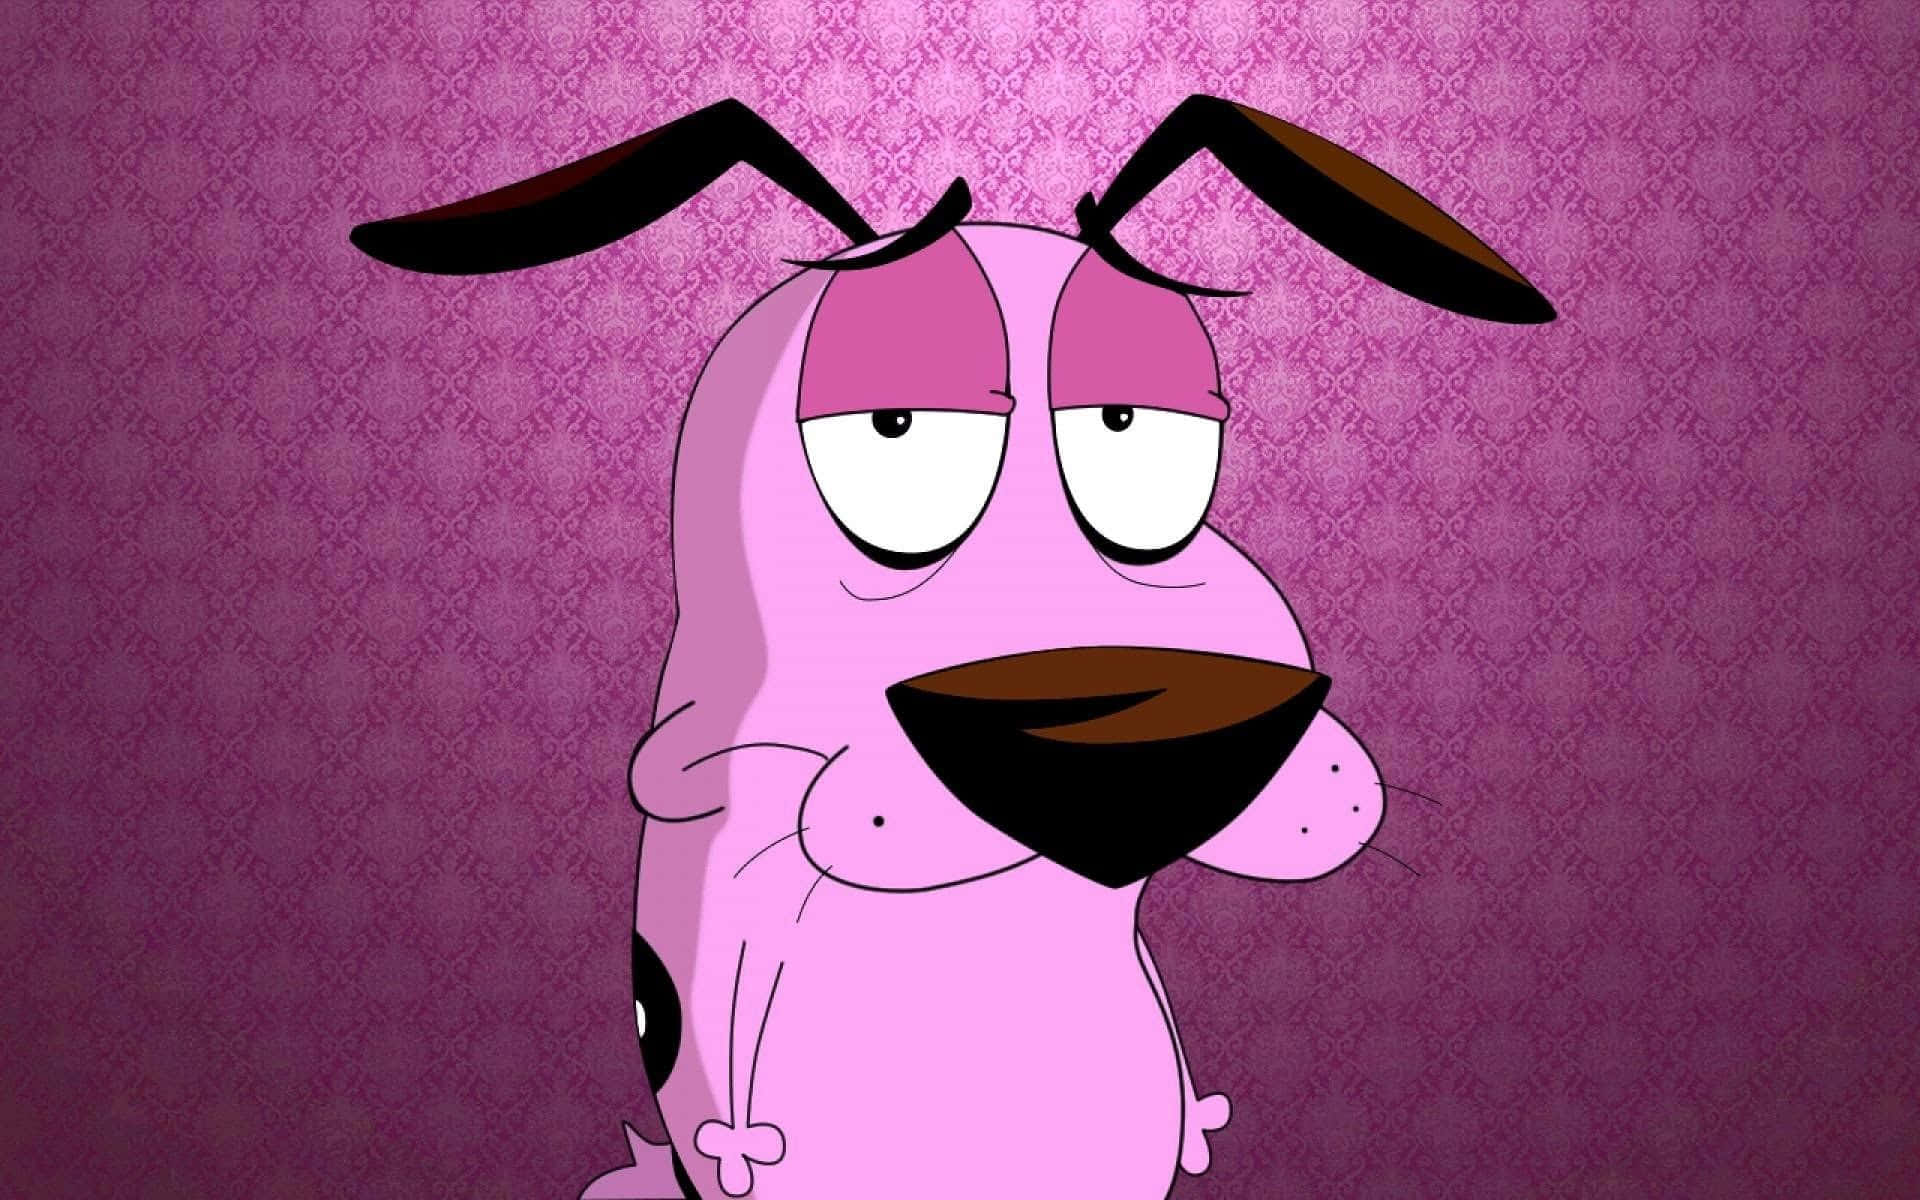 Free Courage The Cowardly Dog Wallpaper Downloads, [100+] Courage The Cowardly  Dog Wallpapers for FREE 